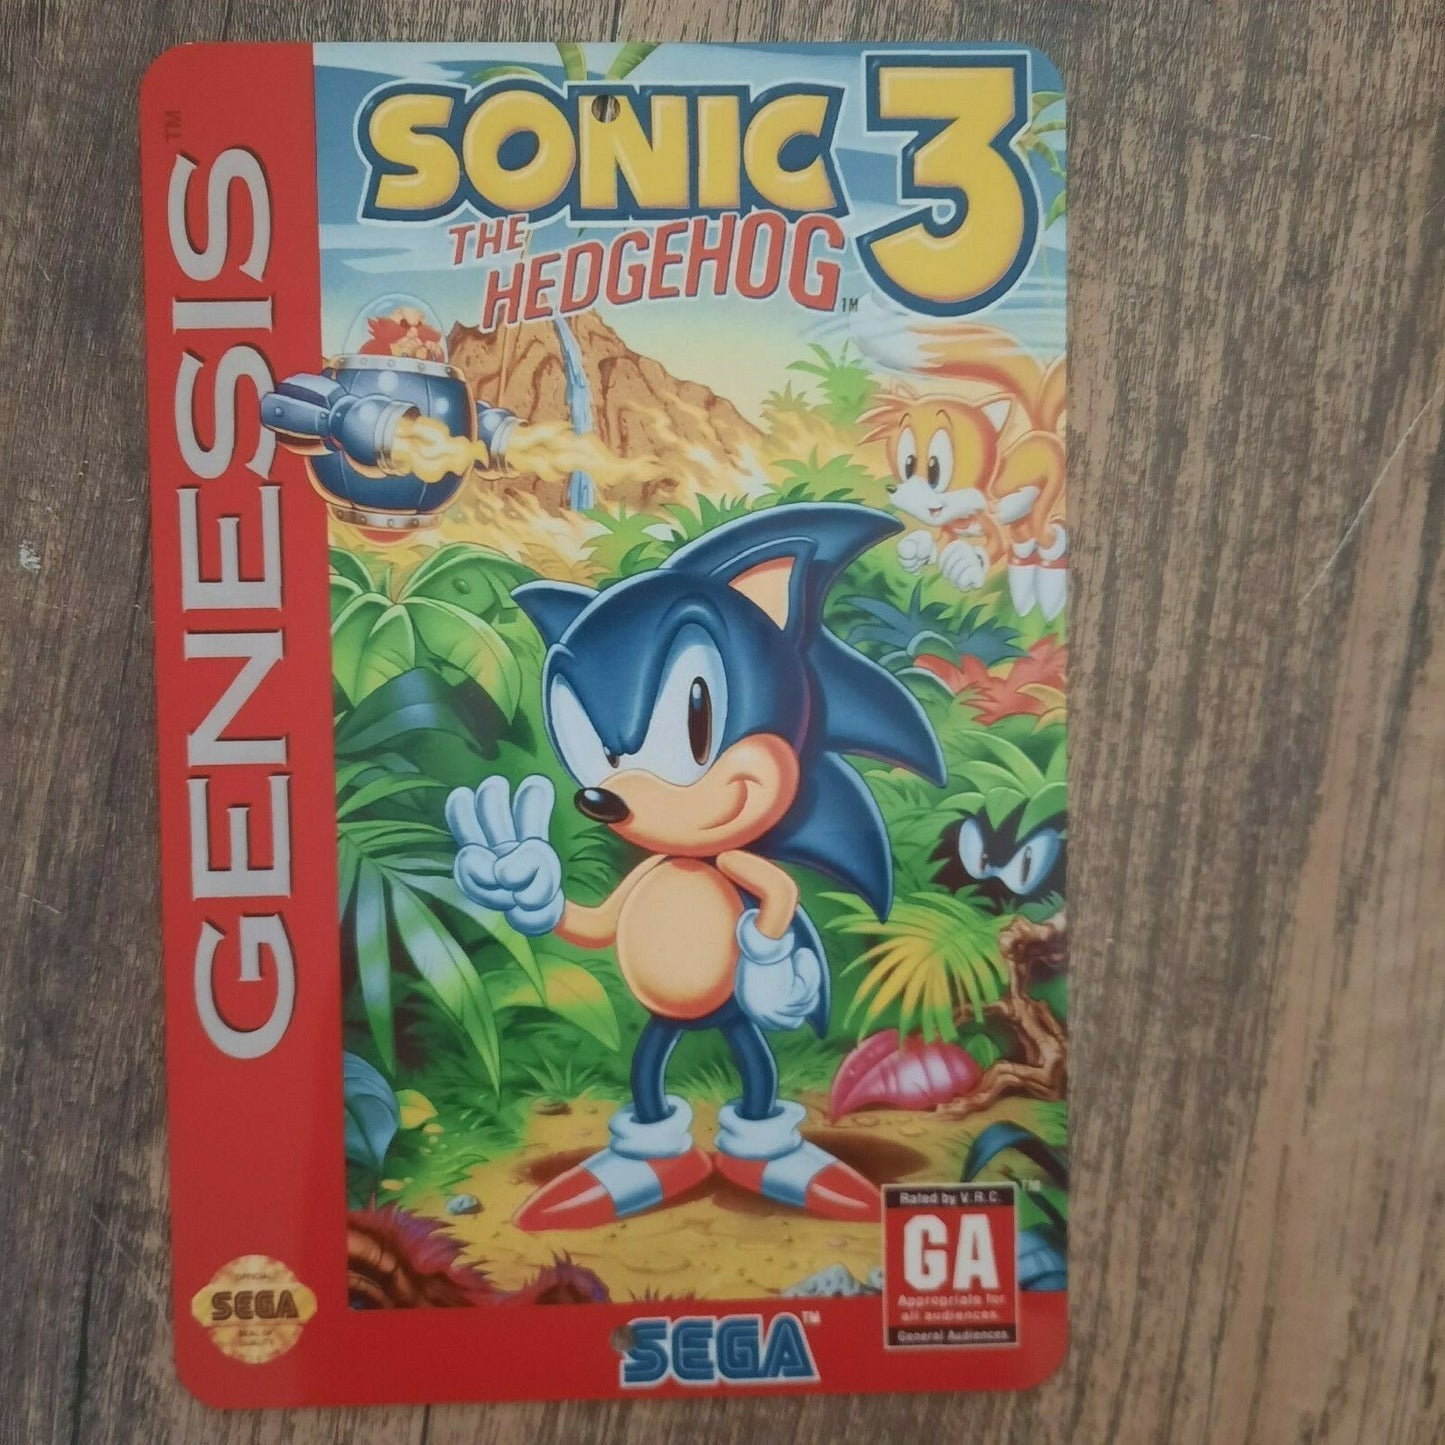 Sonic the Hedgehog 3 Video Game Box Cover Art 8x12 Metal Wall Sign